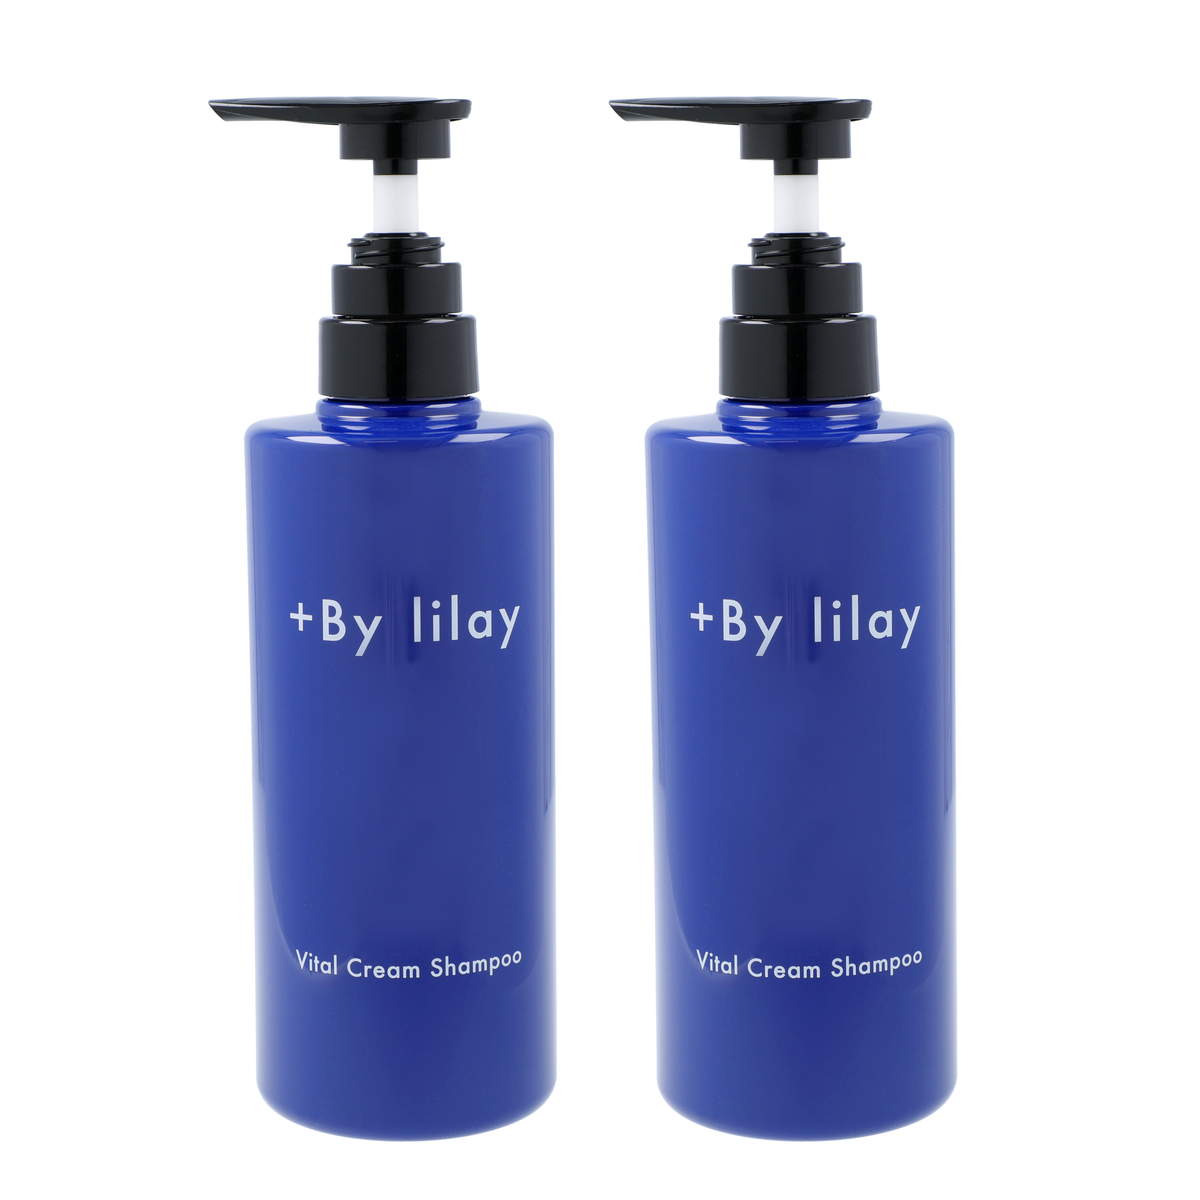 By lilay バイタル クリーム シャンプー 500ml ×2本 プラスバイリレイ（＋By lilay）